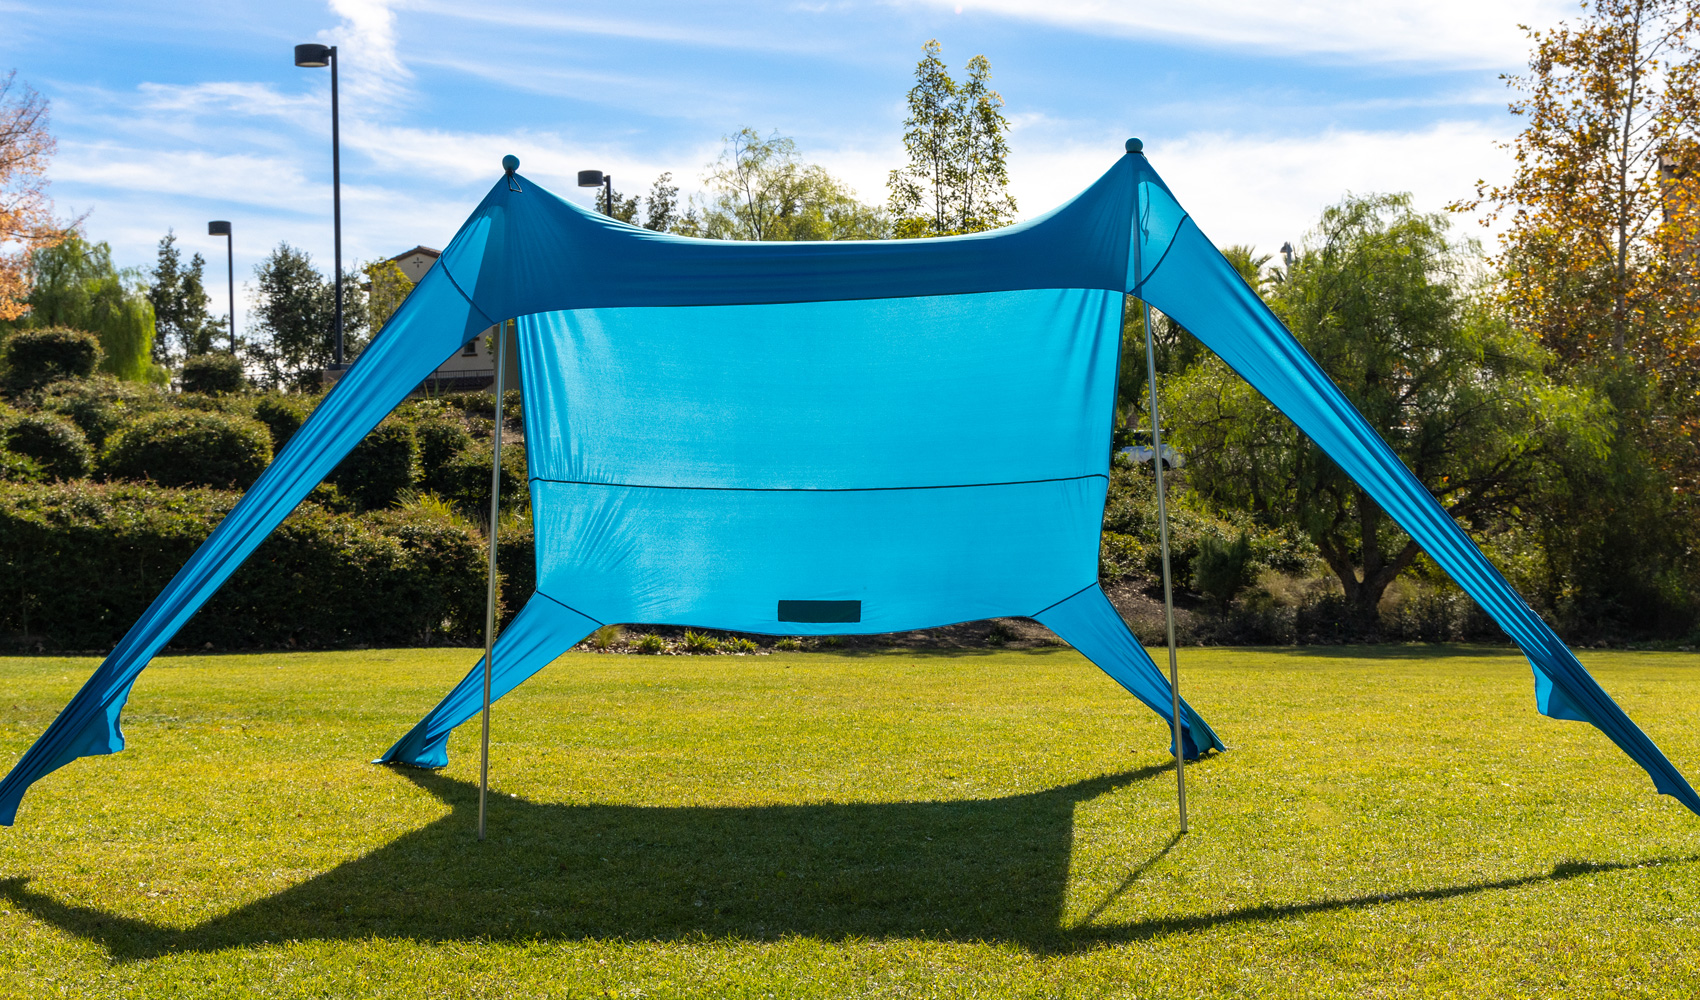 Pure Outdoor Portable 4person Sun Shade with UPF 50+ UV Protection  7 x 7 x 7 ft Lightweight and Portable | Easy Set-Up | Designed for the Outdoors | w/ UV Protection Shop Now